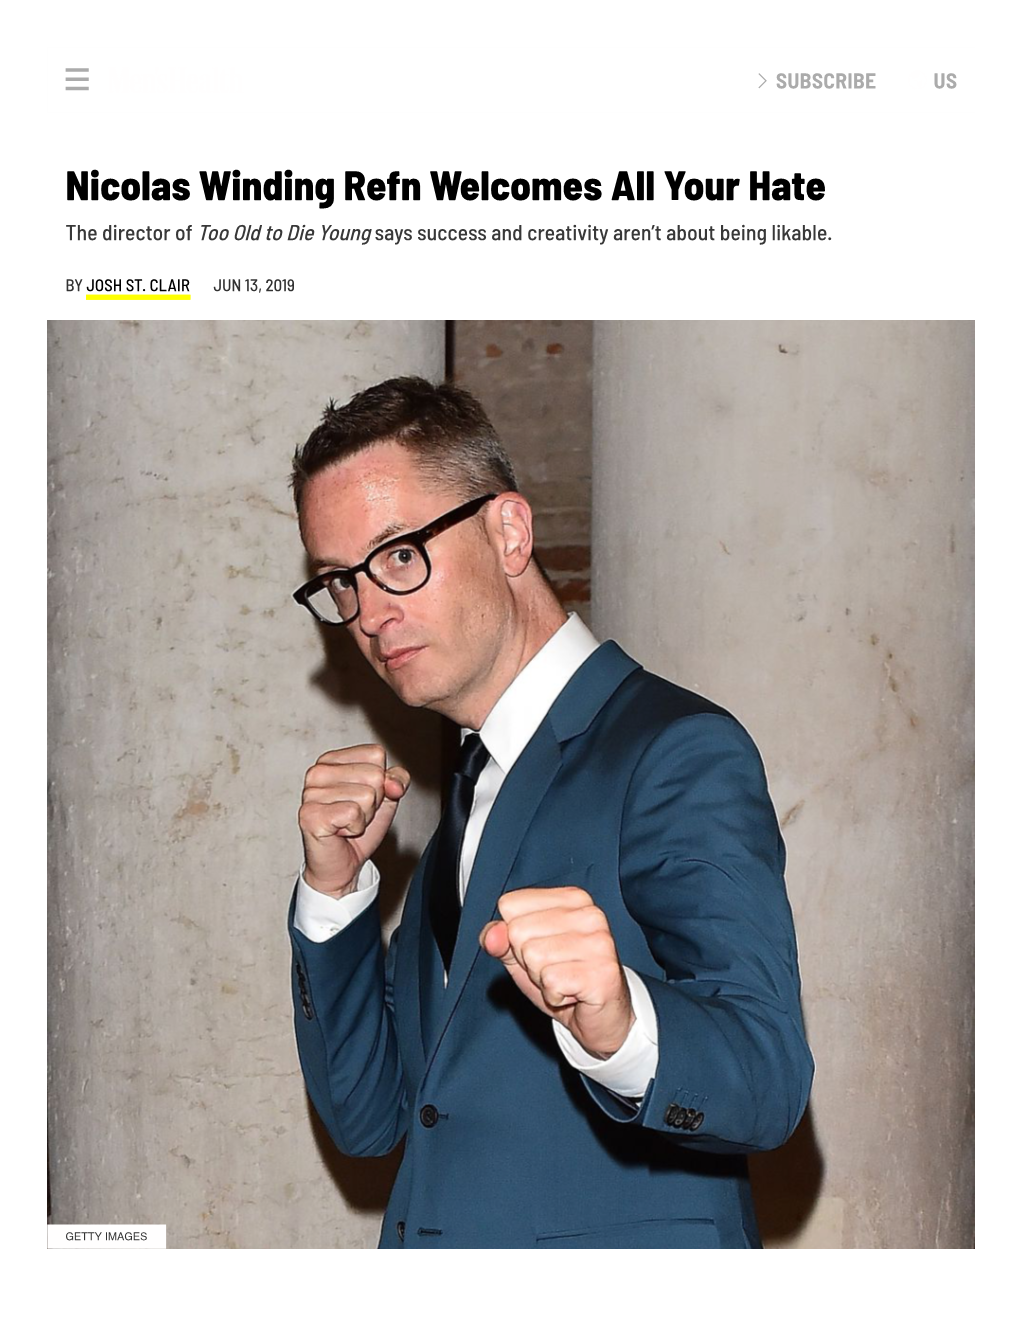 Nicolas Winding Refn Discusses 'Too Old to Die Young'